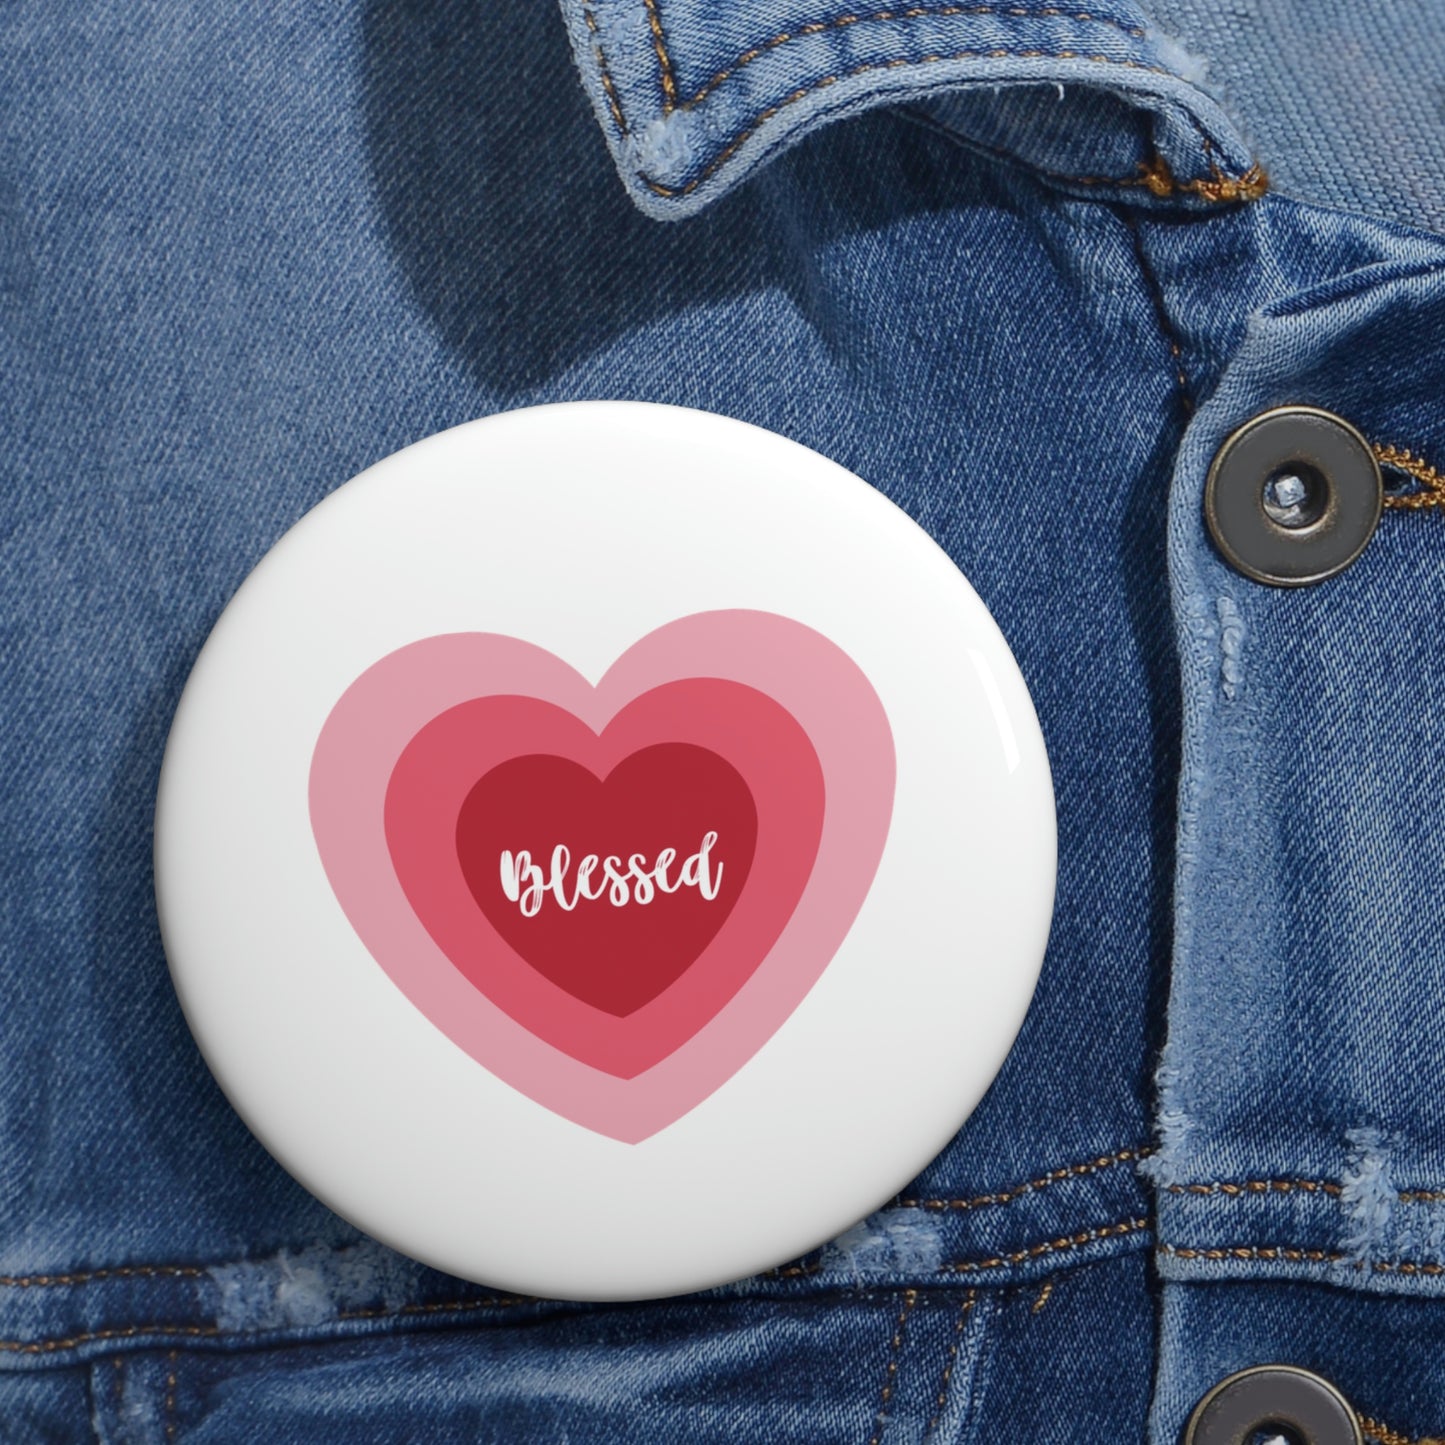 Blessed Heart Pin Button